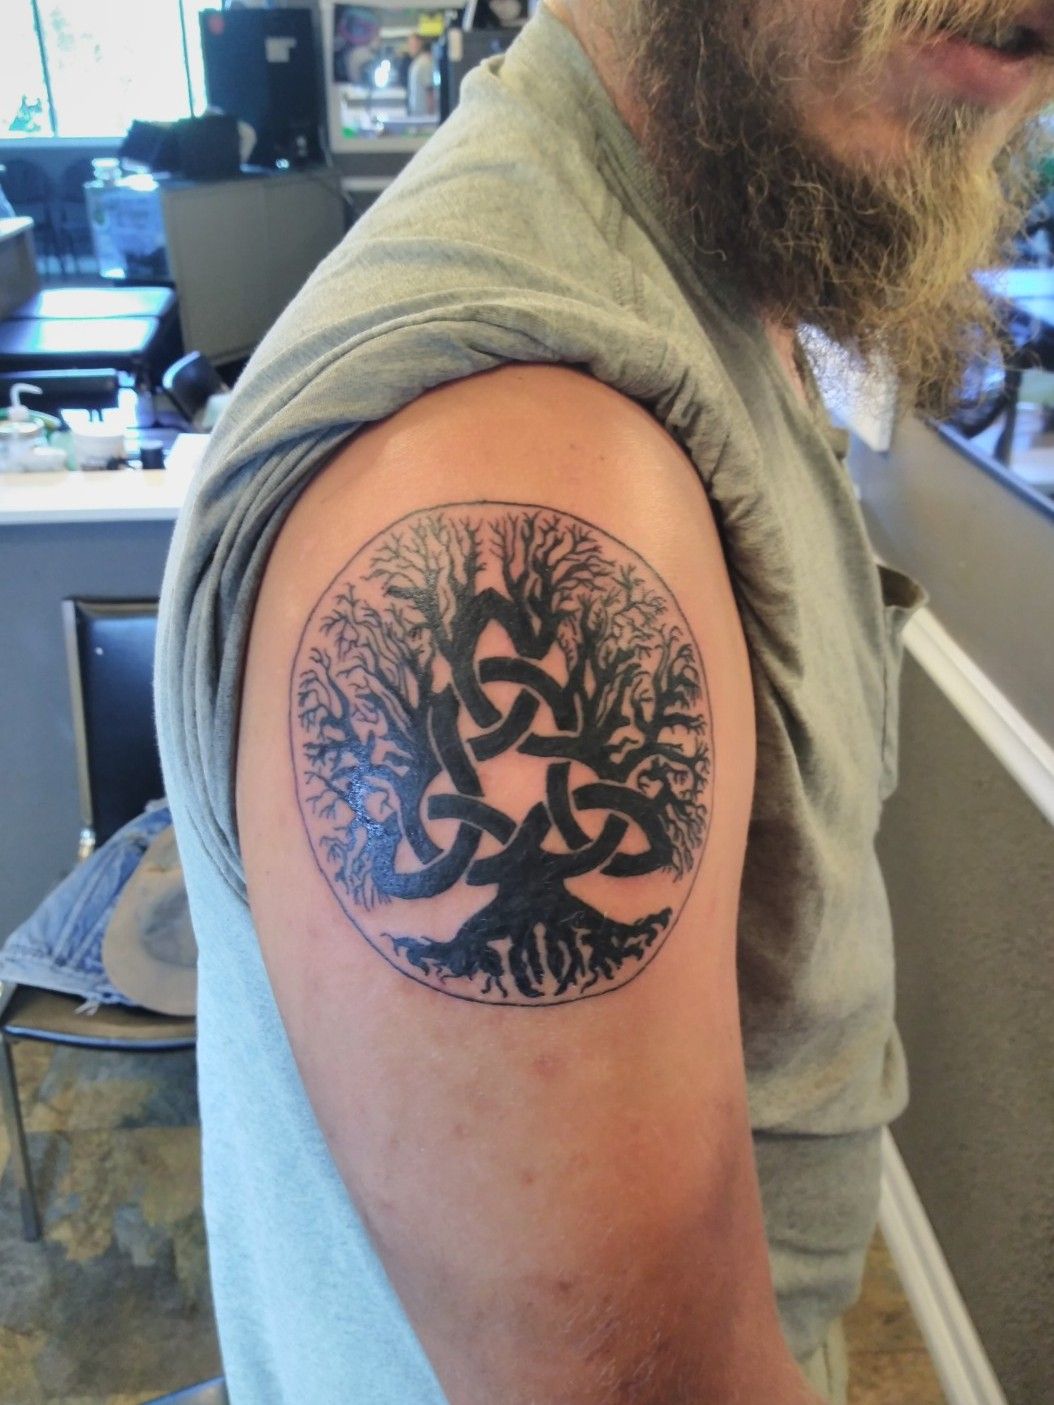 80 Newest Yggdrasil Tattoos Ideas For Men and Women 